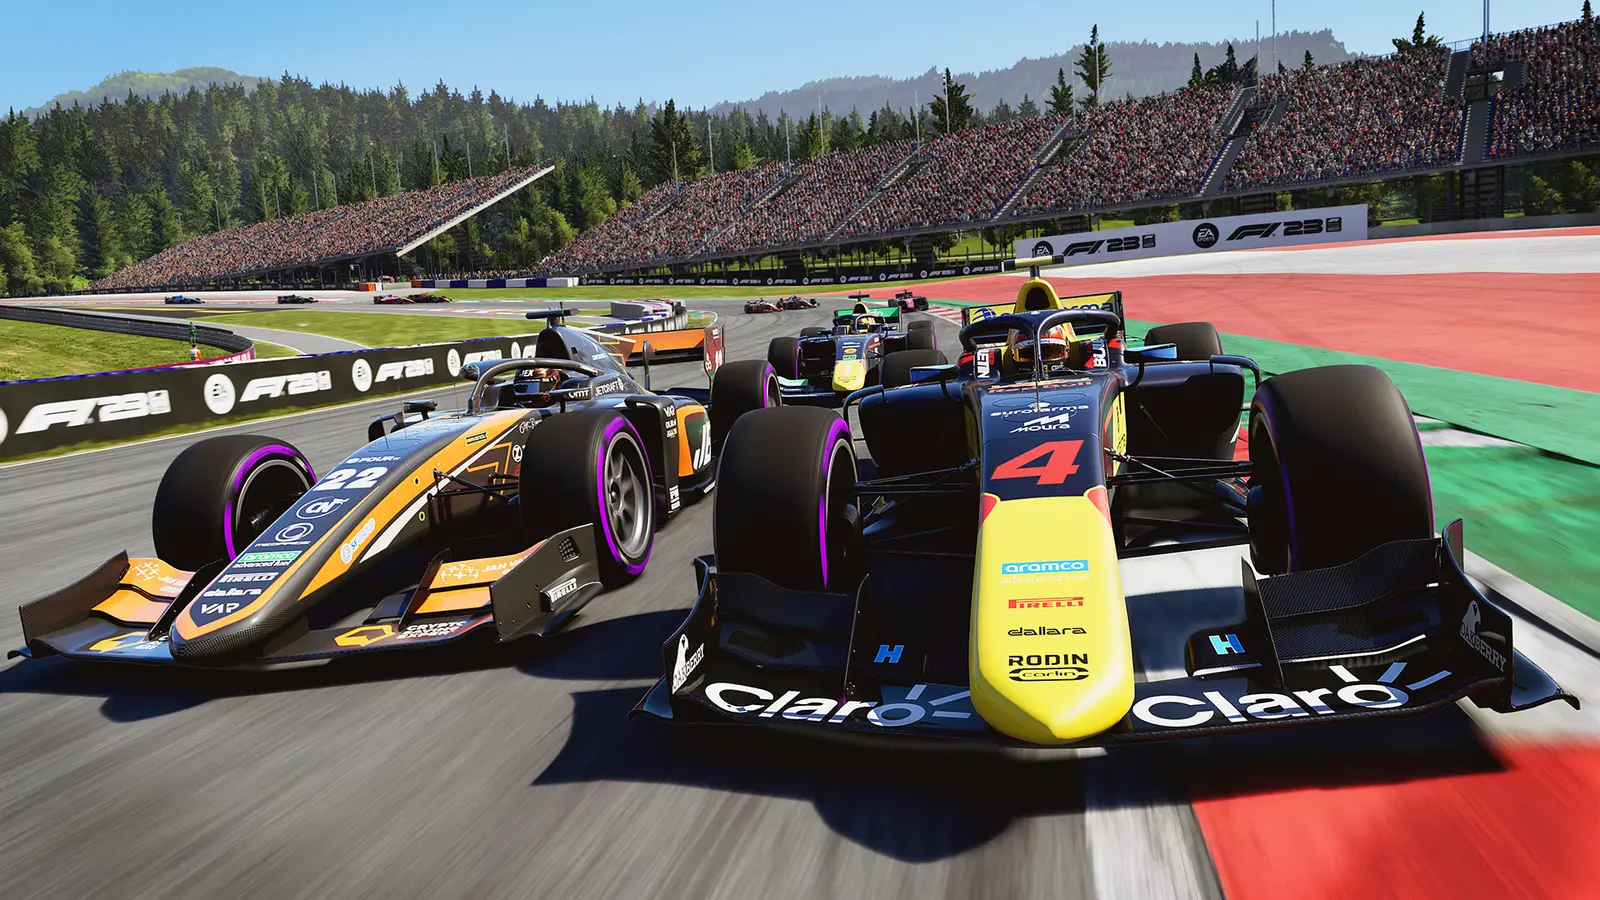 Electronic Arts may announce F1 24 as early as next week. Release, according to the leak — May 31